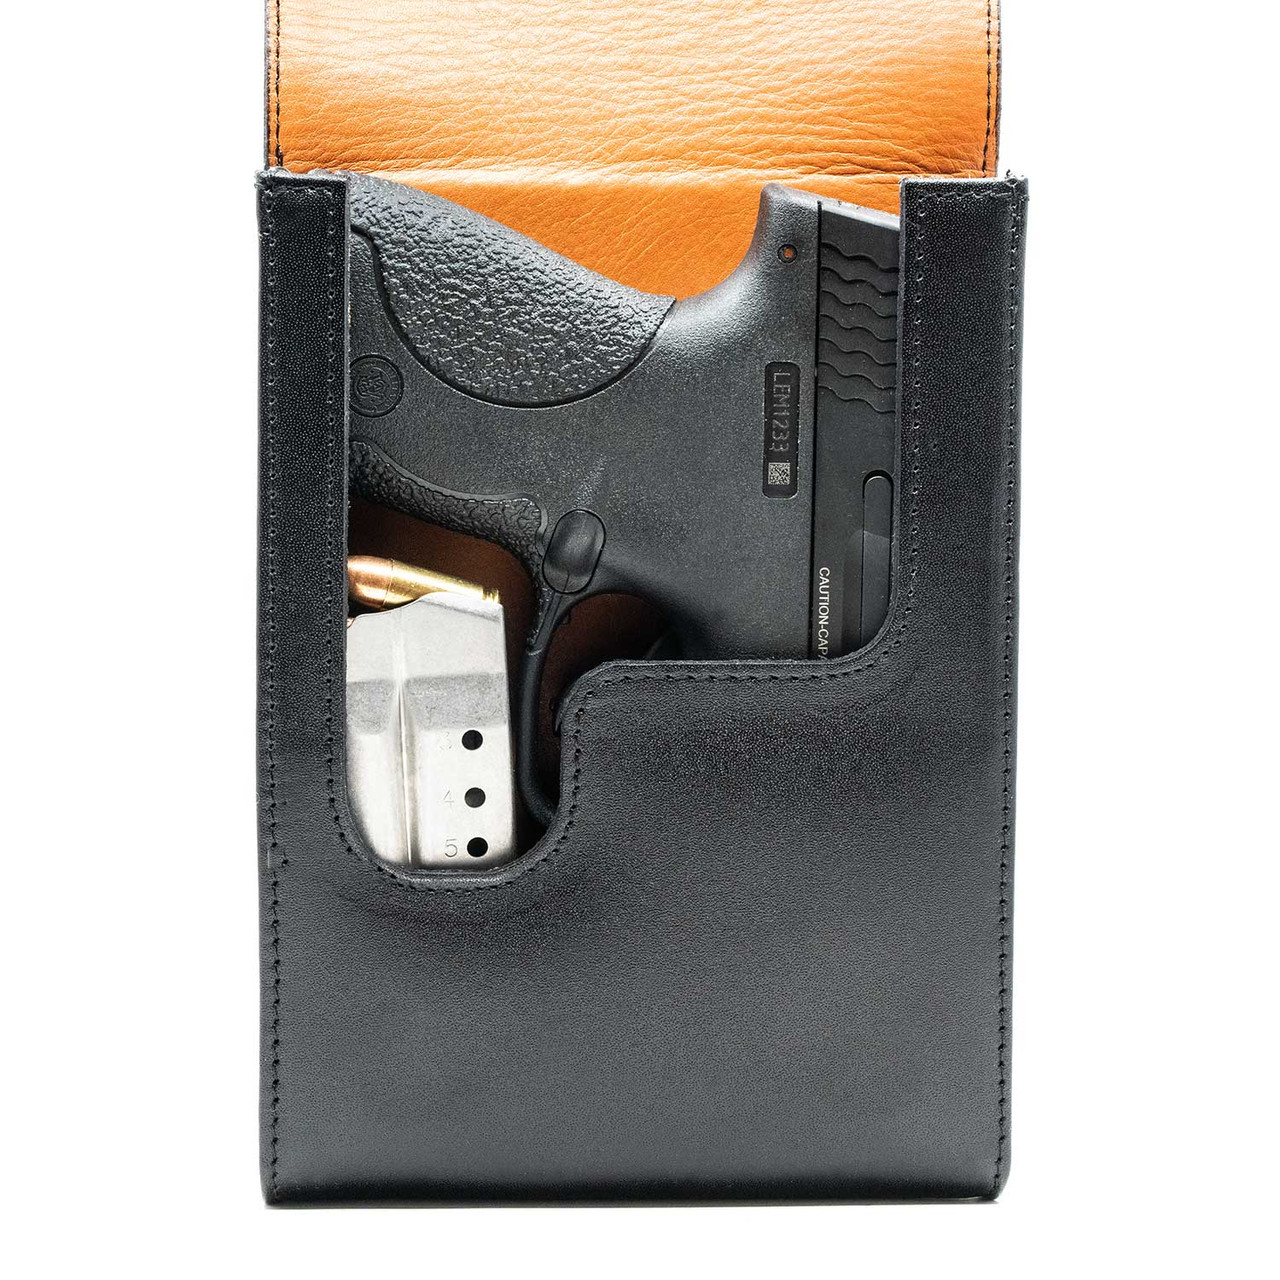 The Kahr S9 Xtra Mag Black Leather Holster